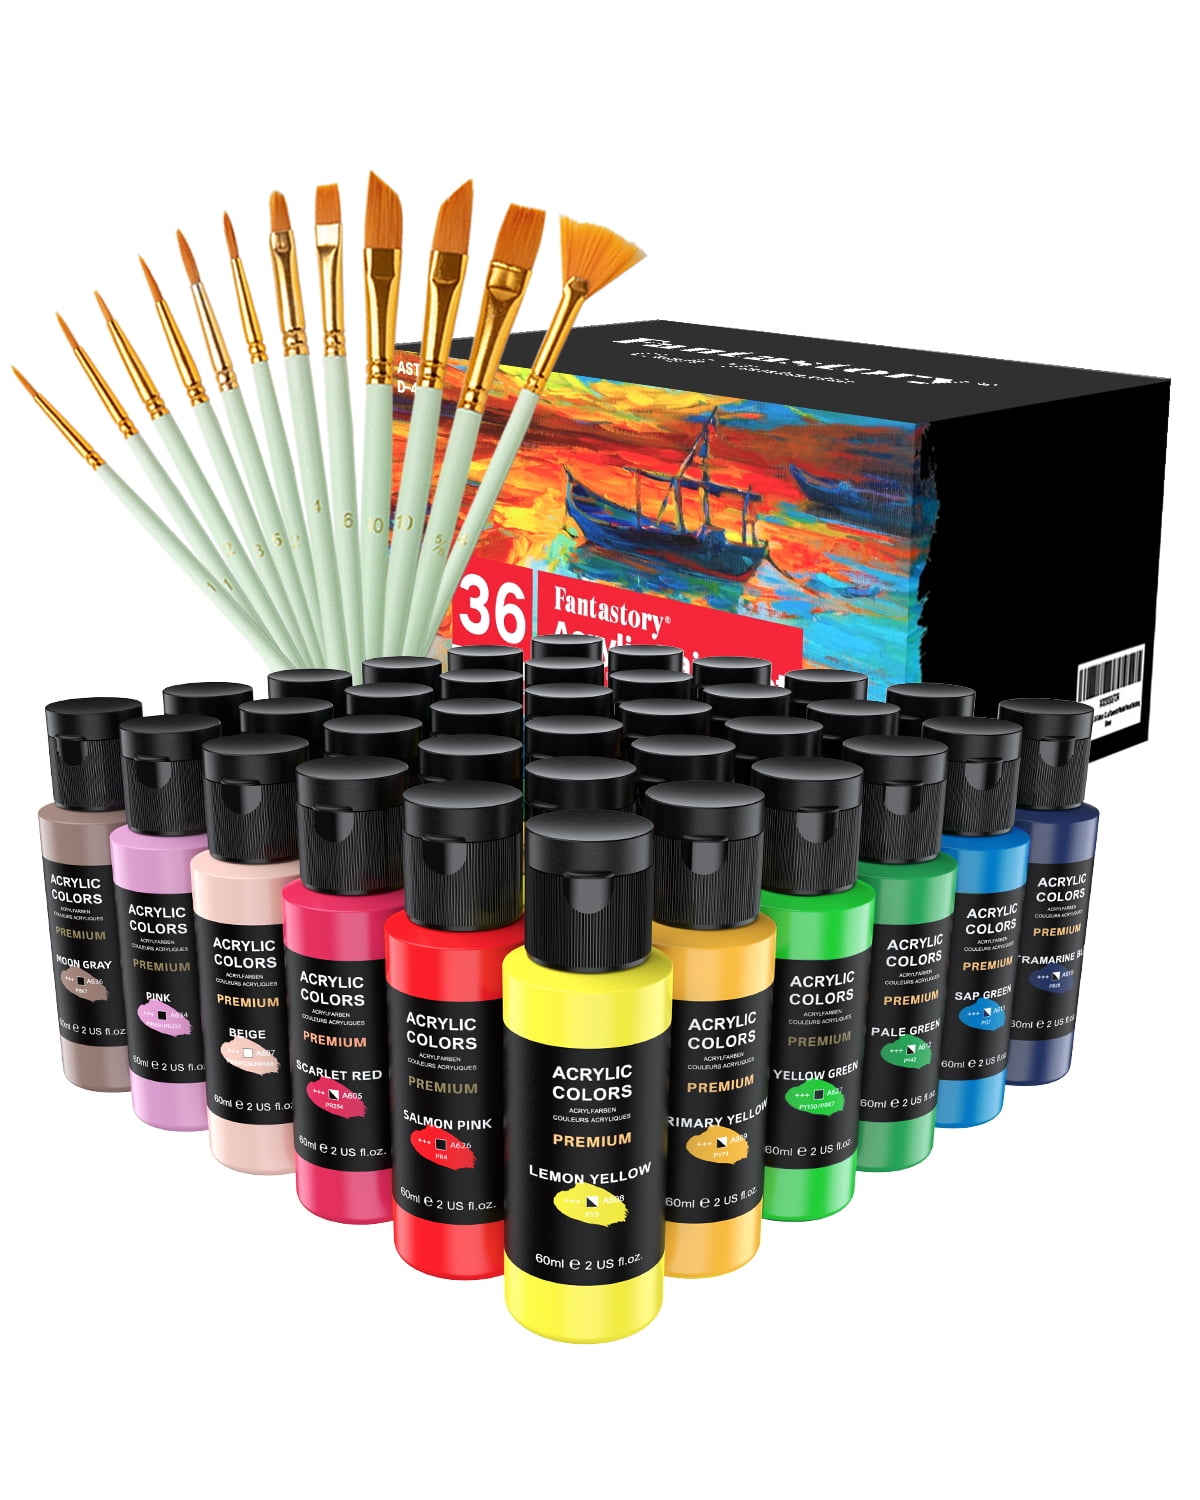  Acrylic Paint Set, Art Paints (2fl Oz60ml ) Crafts Acrylic  Paint For Kids And Adults with 5 Brushes, Non Toxic Metallic Acrylic Paints  for Wood Canvas Crafts Stone Ceramic Model Painting